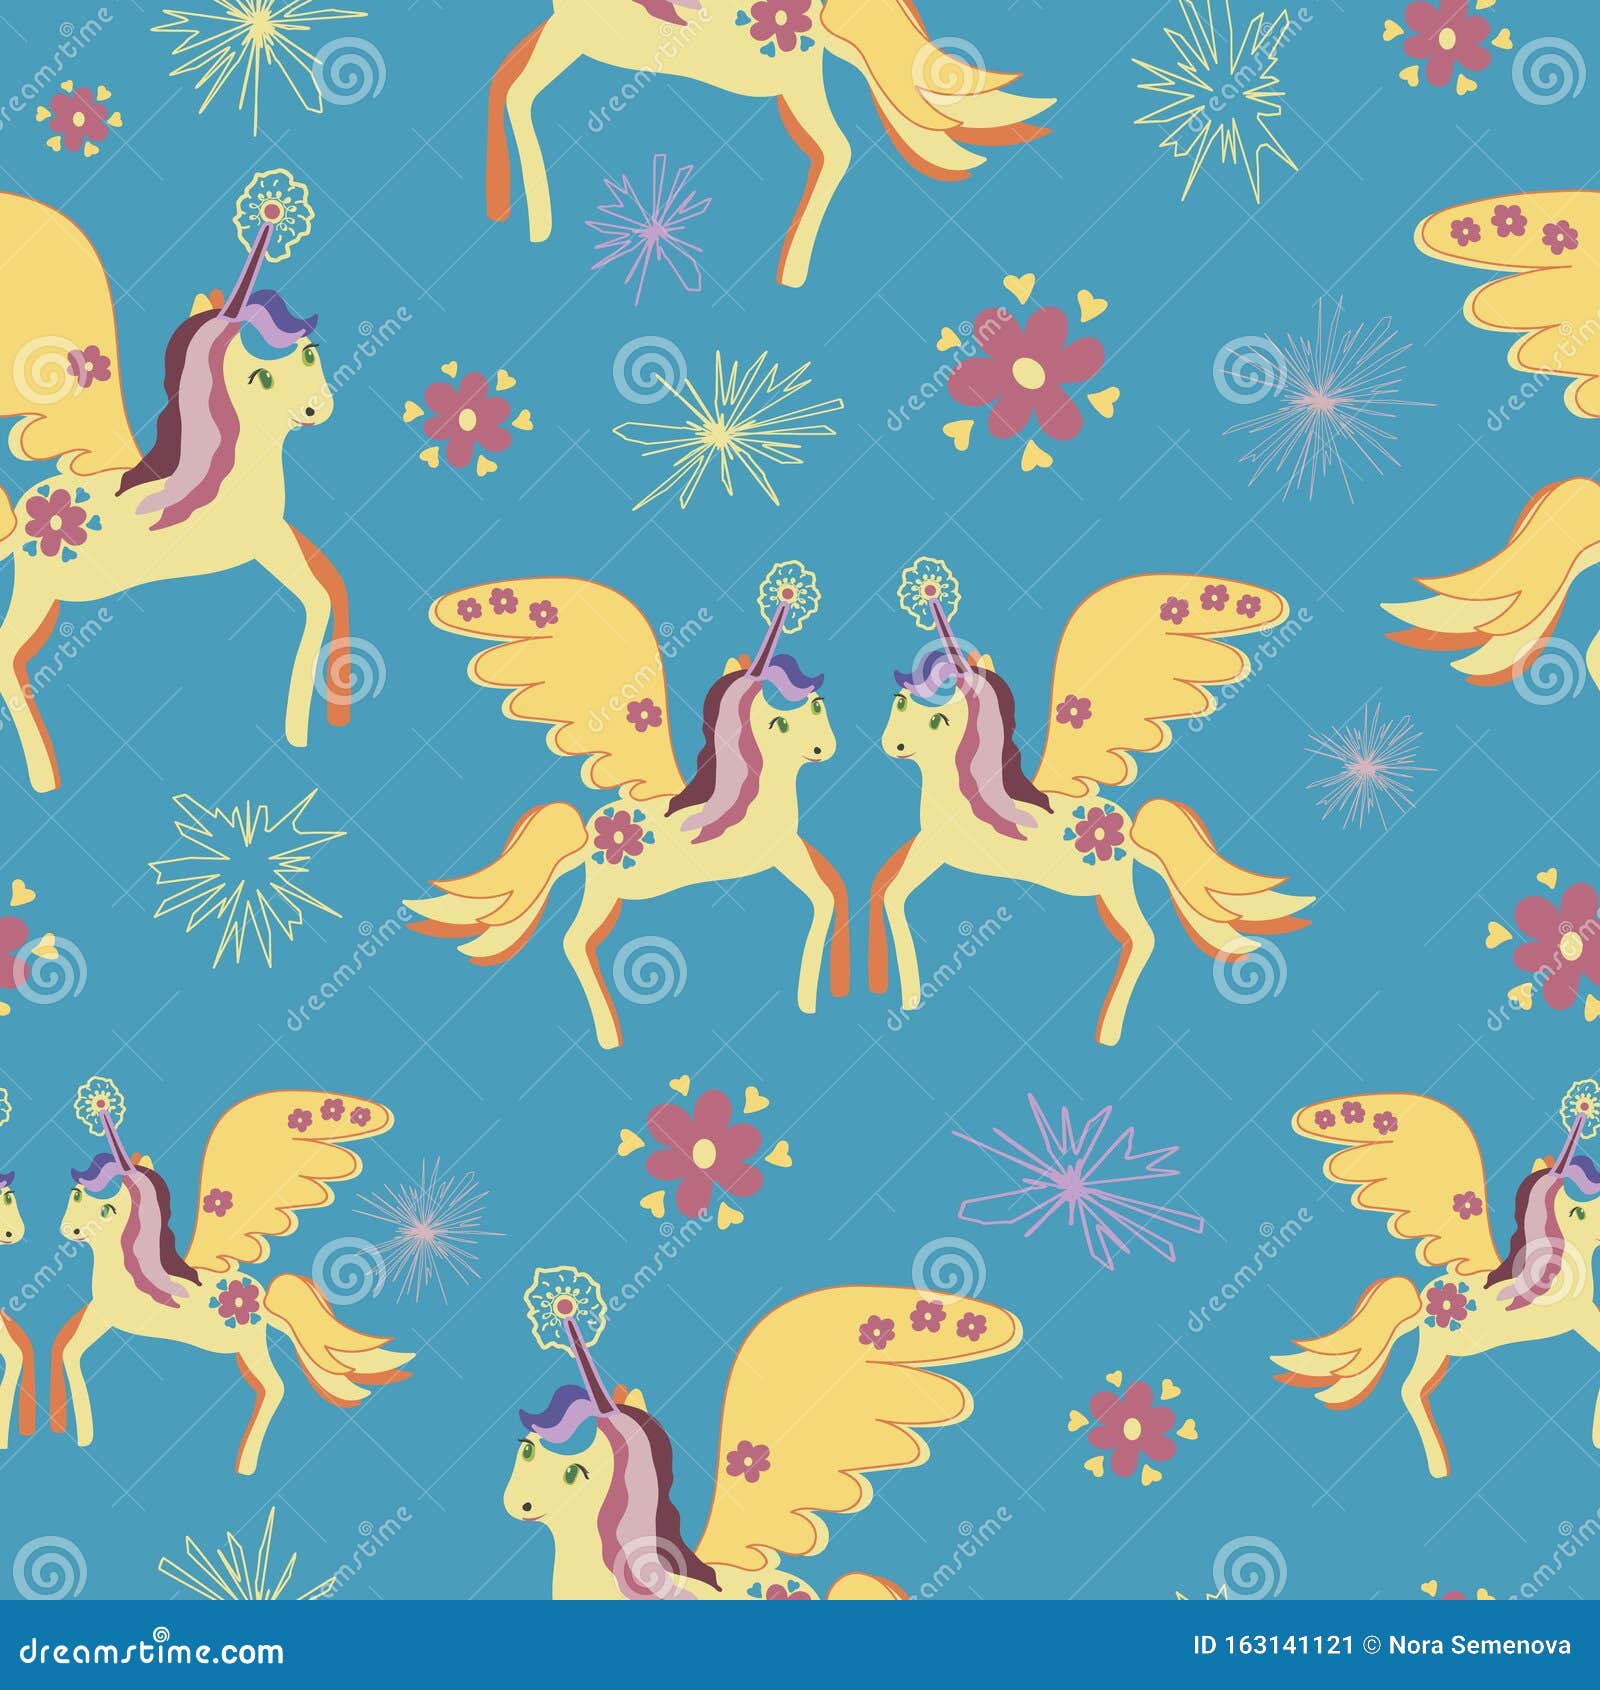 Cute Colorful Magic Unicorn Seamless Poster,greeting Card, Fabric,  Wallpaper,t-shirt.Miracle Colorful Unicorn Seamless Stock Vector -  Illustration of pastel, colorful: 163141121